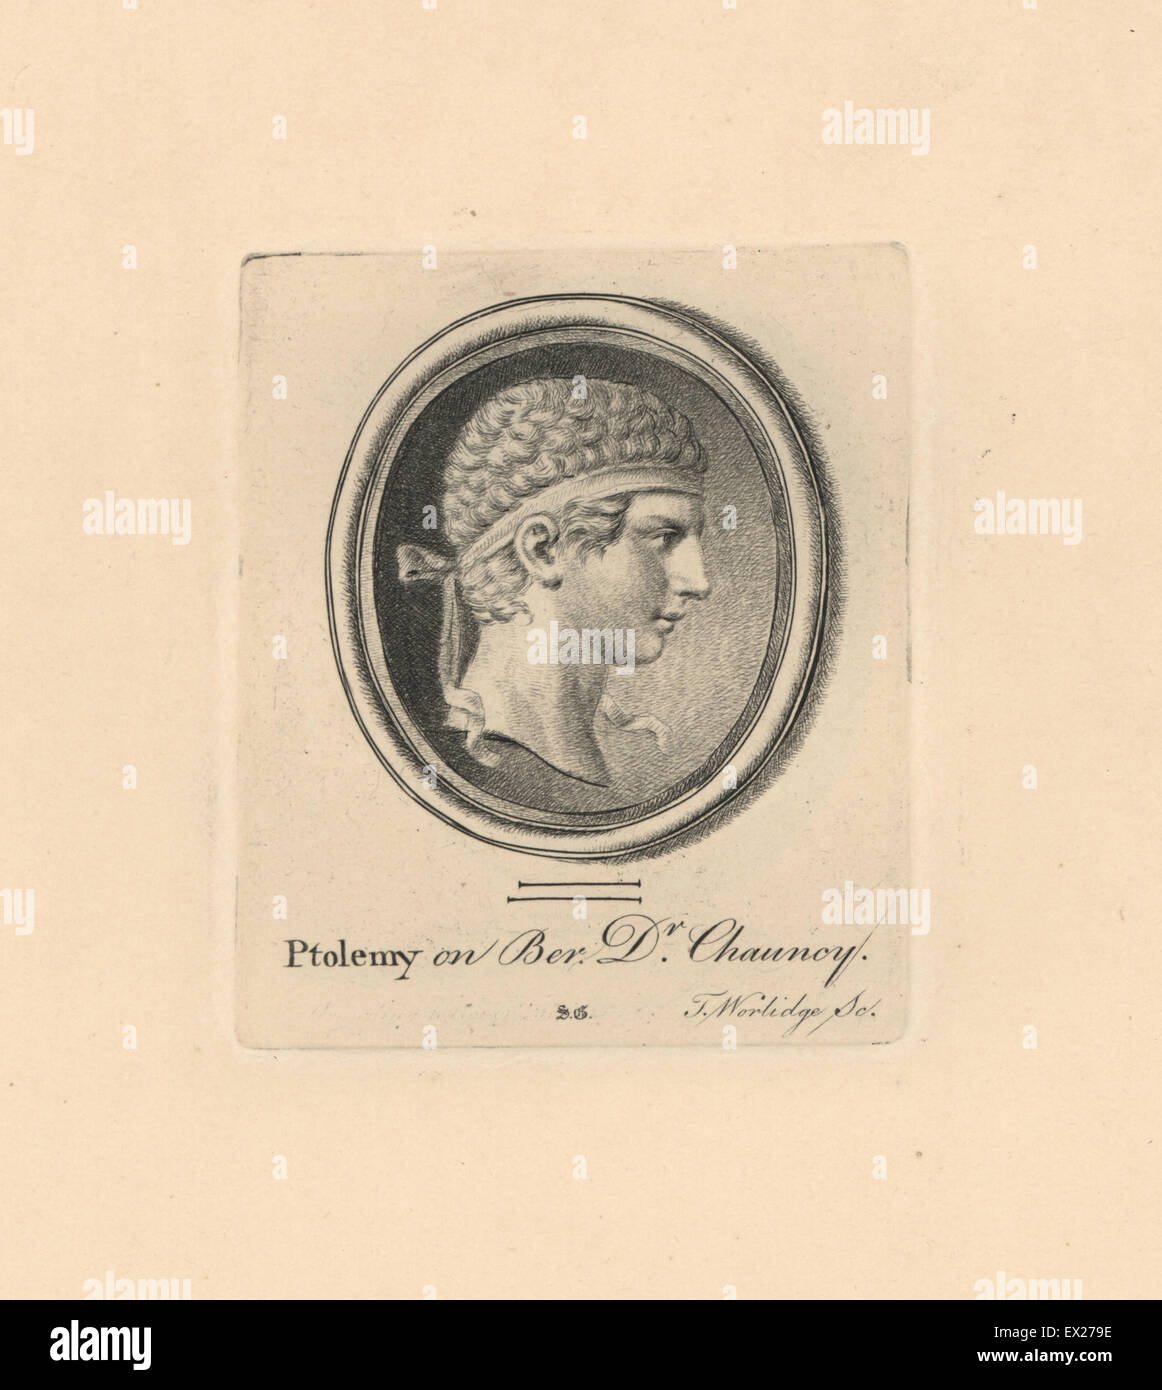 Portrait of Ptolemy V Epiphanes, 5th ruler of the Ptolemaic dynasty, in diadem, on beryl in Dr. Chauncy's collection. Copperplate engraving by Thomas Worlidge from James Vallentin's One Hundred and Eight Engravings from Antique Gems, 1863. Stock Photo